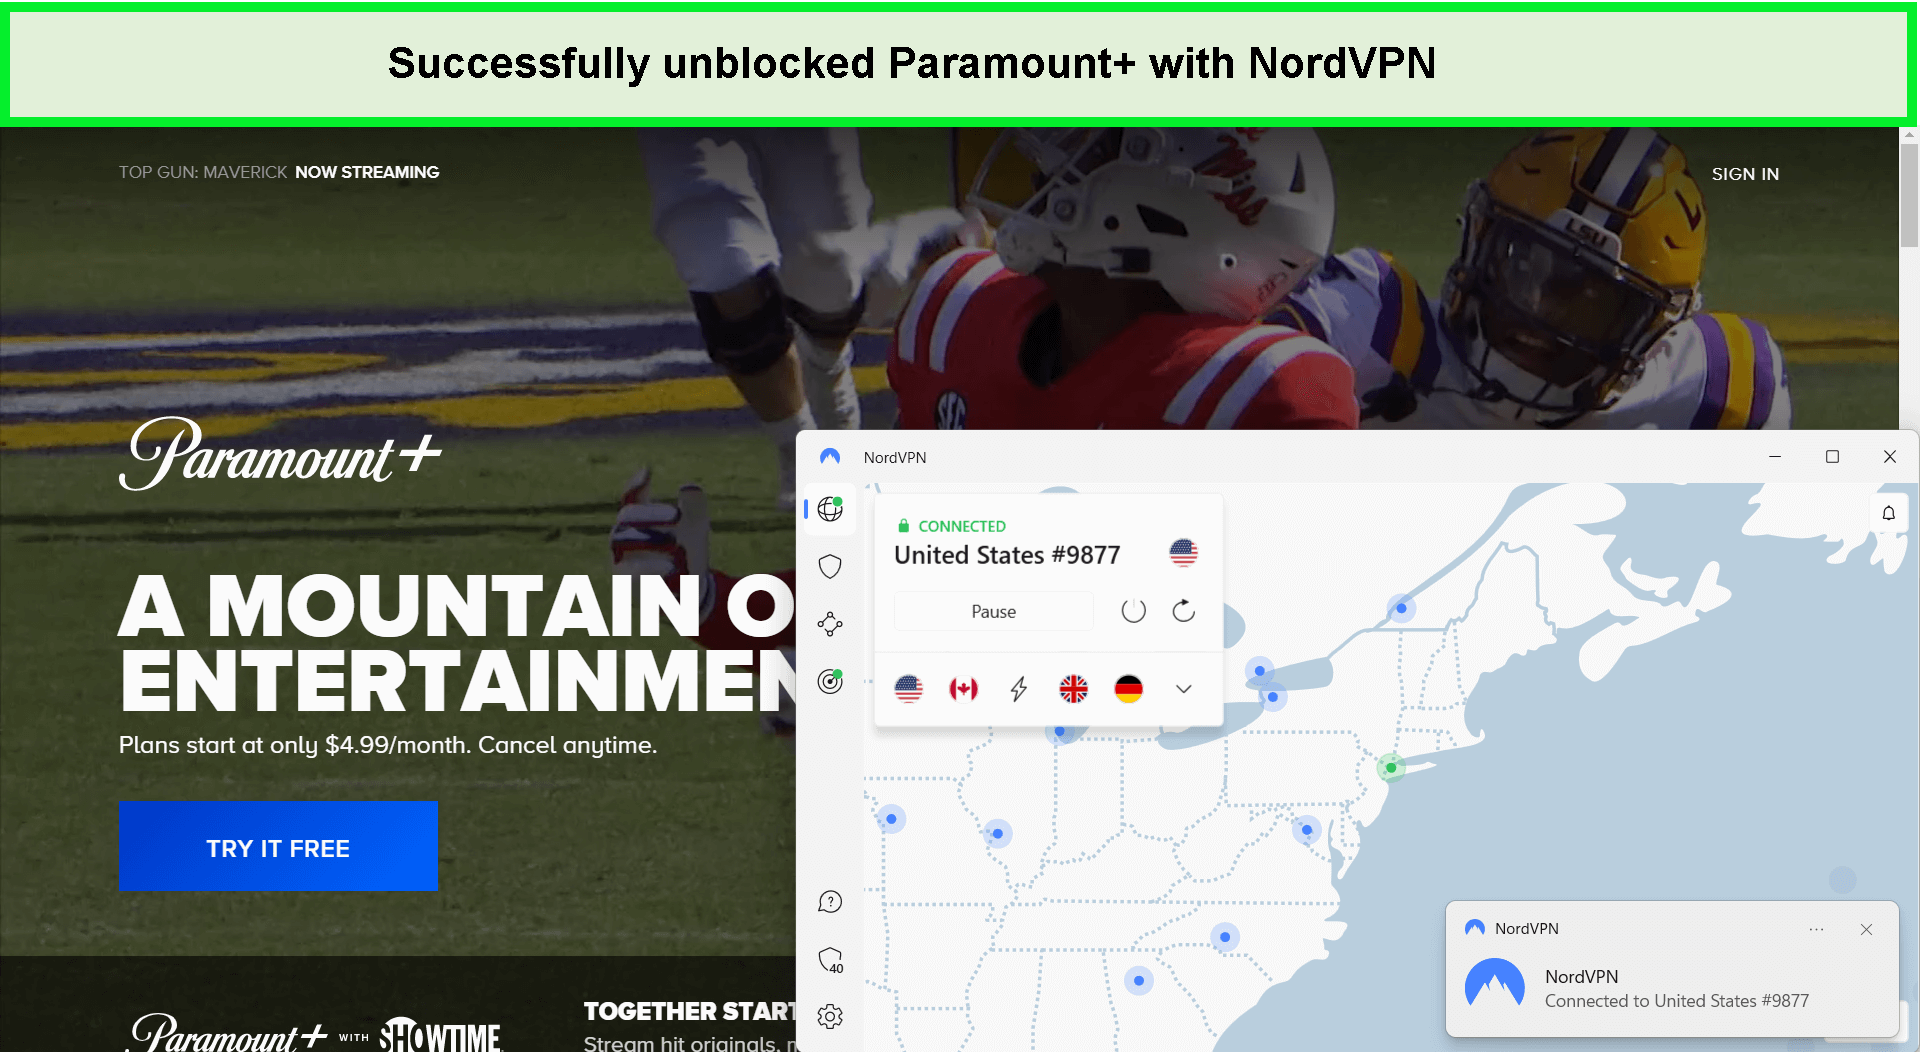 successfully-unblocked-paramount-with-nordvpn-in-brazil